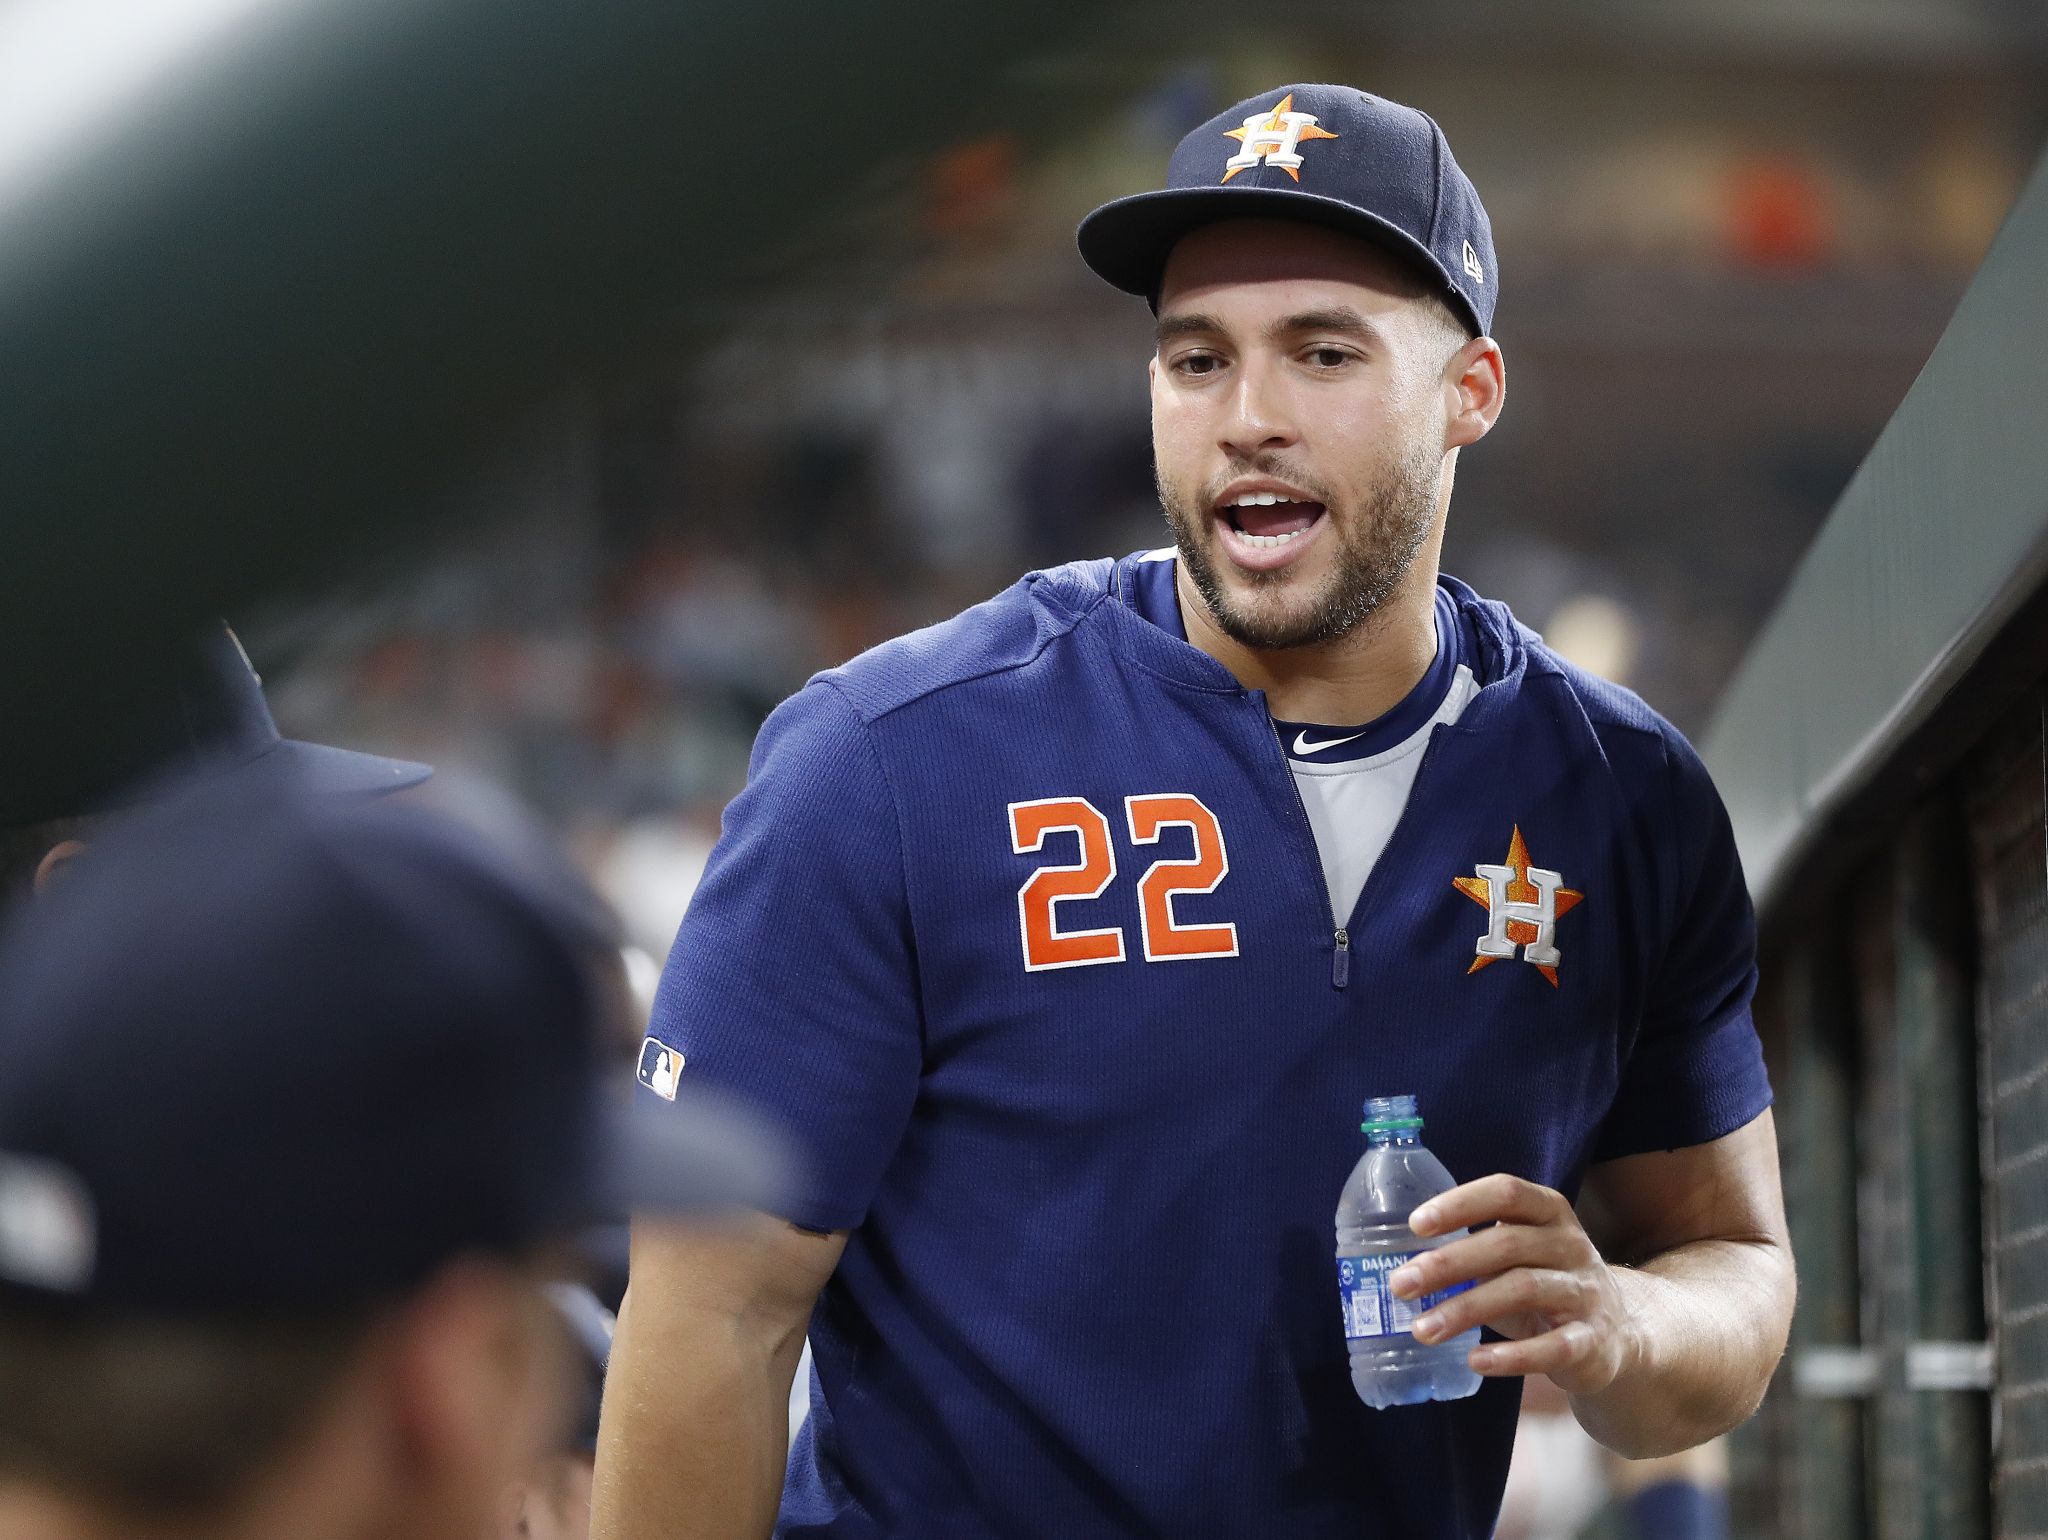 Springer likely to return to Astros on Sunday